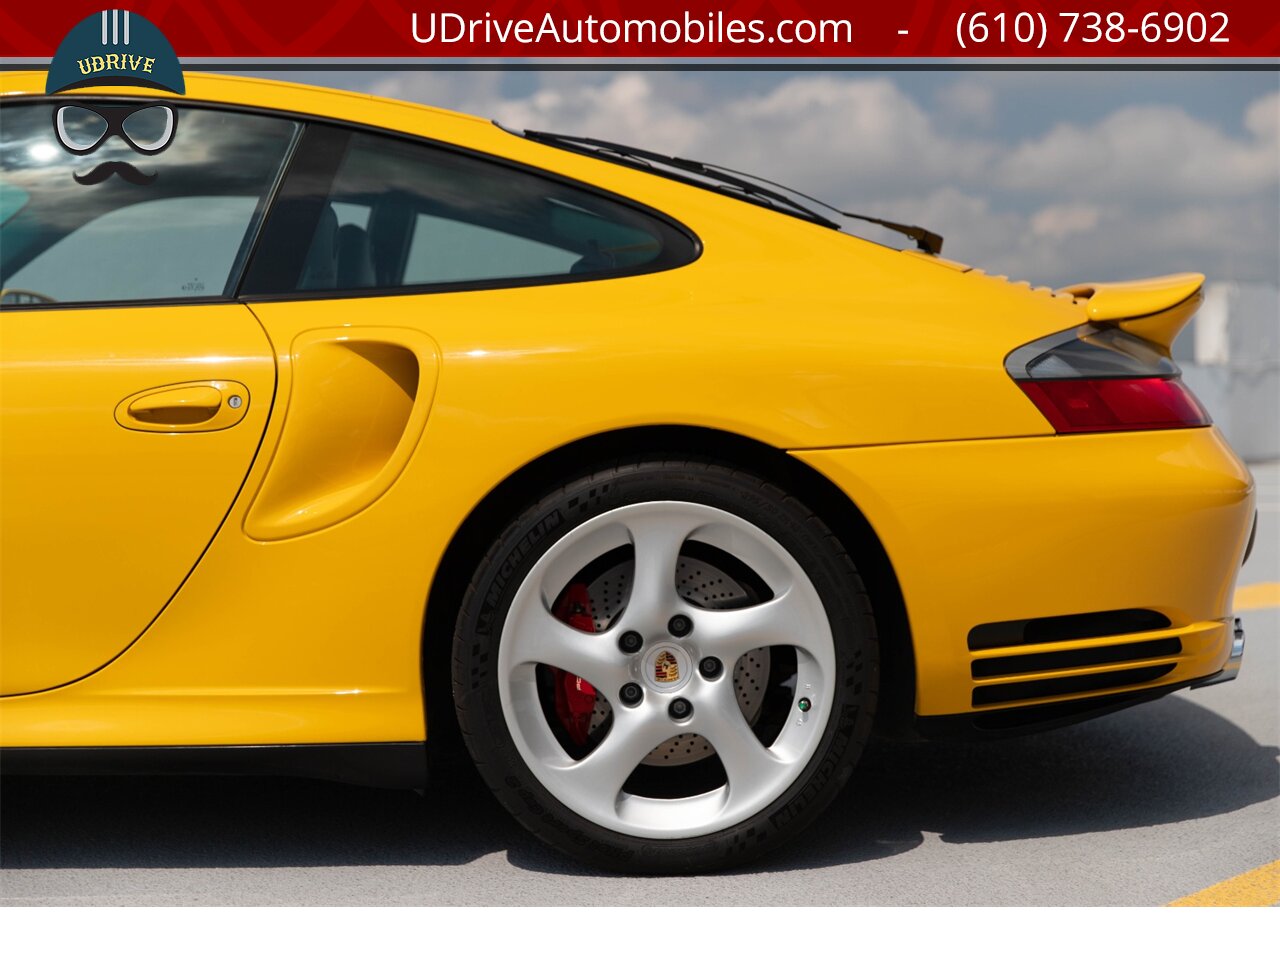 2003 Porsche 911 996 Turbo X50 6Sp Nephrite Green Lthr 9k Miles  Deviating Yellow Stitching Collector Grade BACK AGAIN - Photo 21 - West Chester, PA 19382